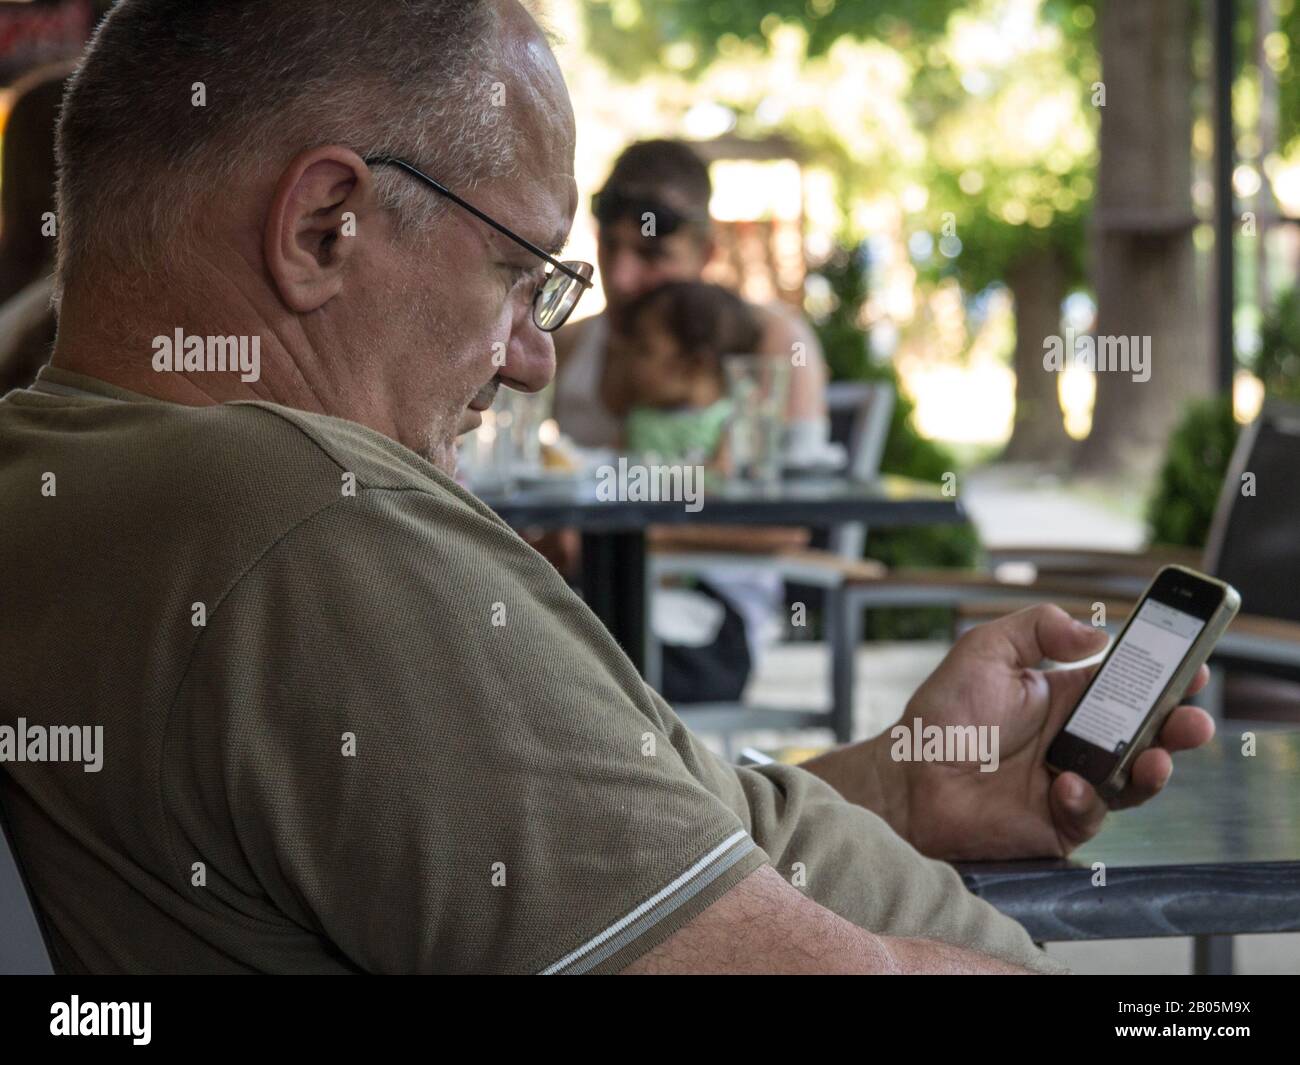 ALIBUNAR, SERBIA - JUNE 6, 2015: Oldd sernior white man sitting in a cafe looking at an Apple IPhone 4 smartphone using the mobile internet data.   Pi Stock Photo